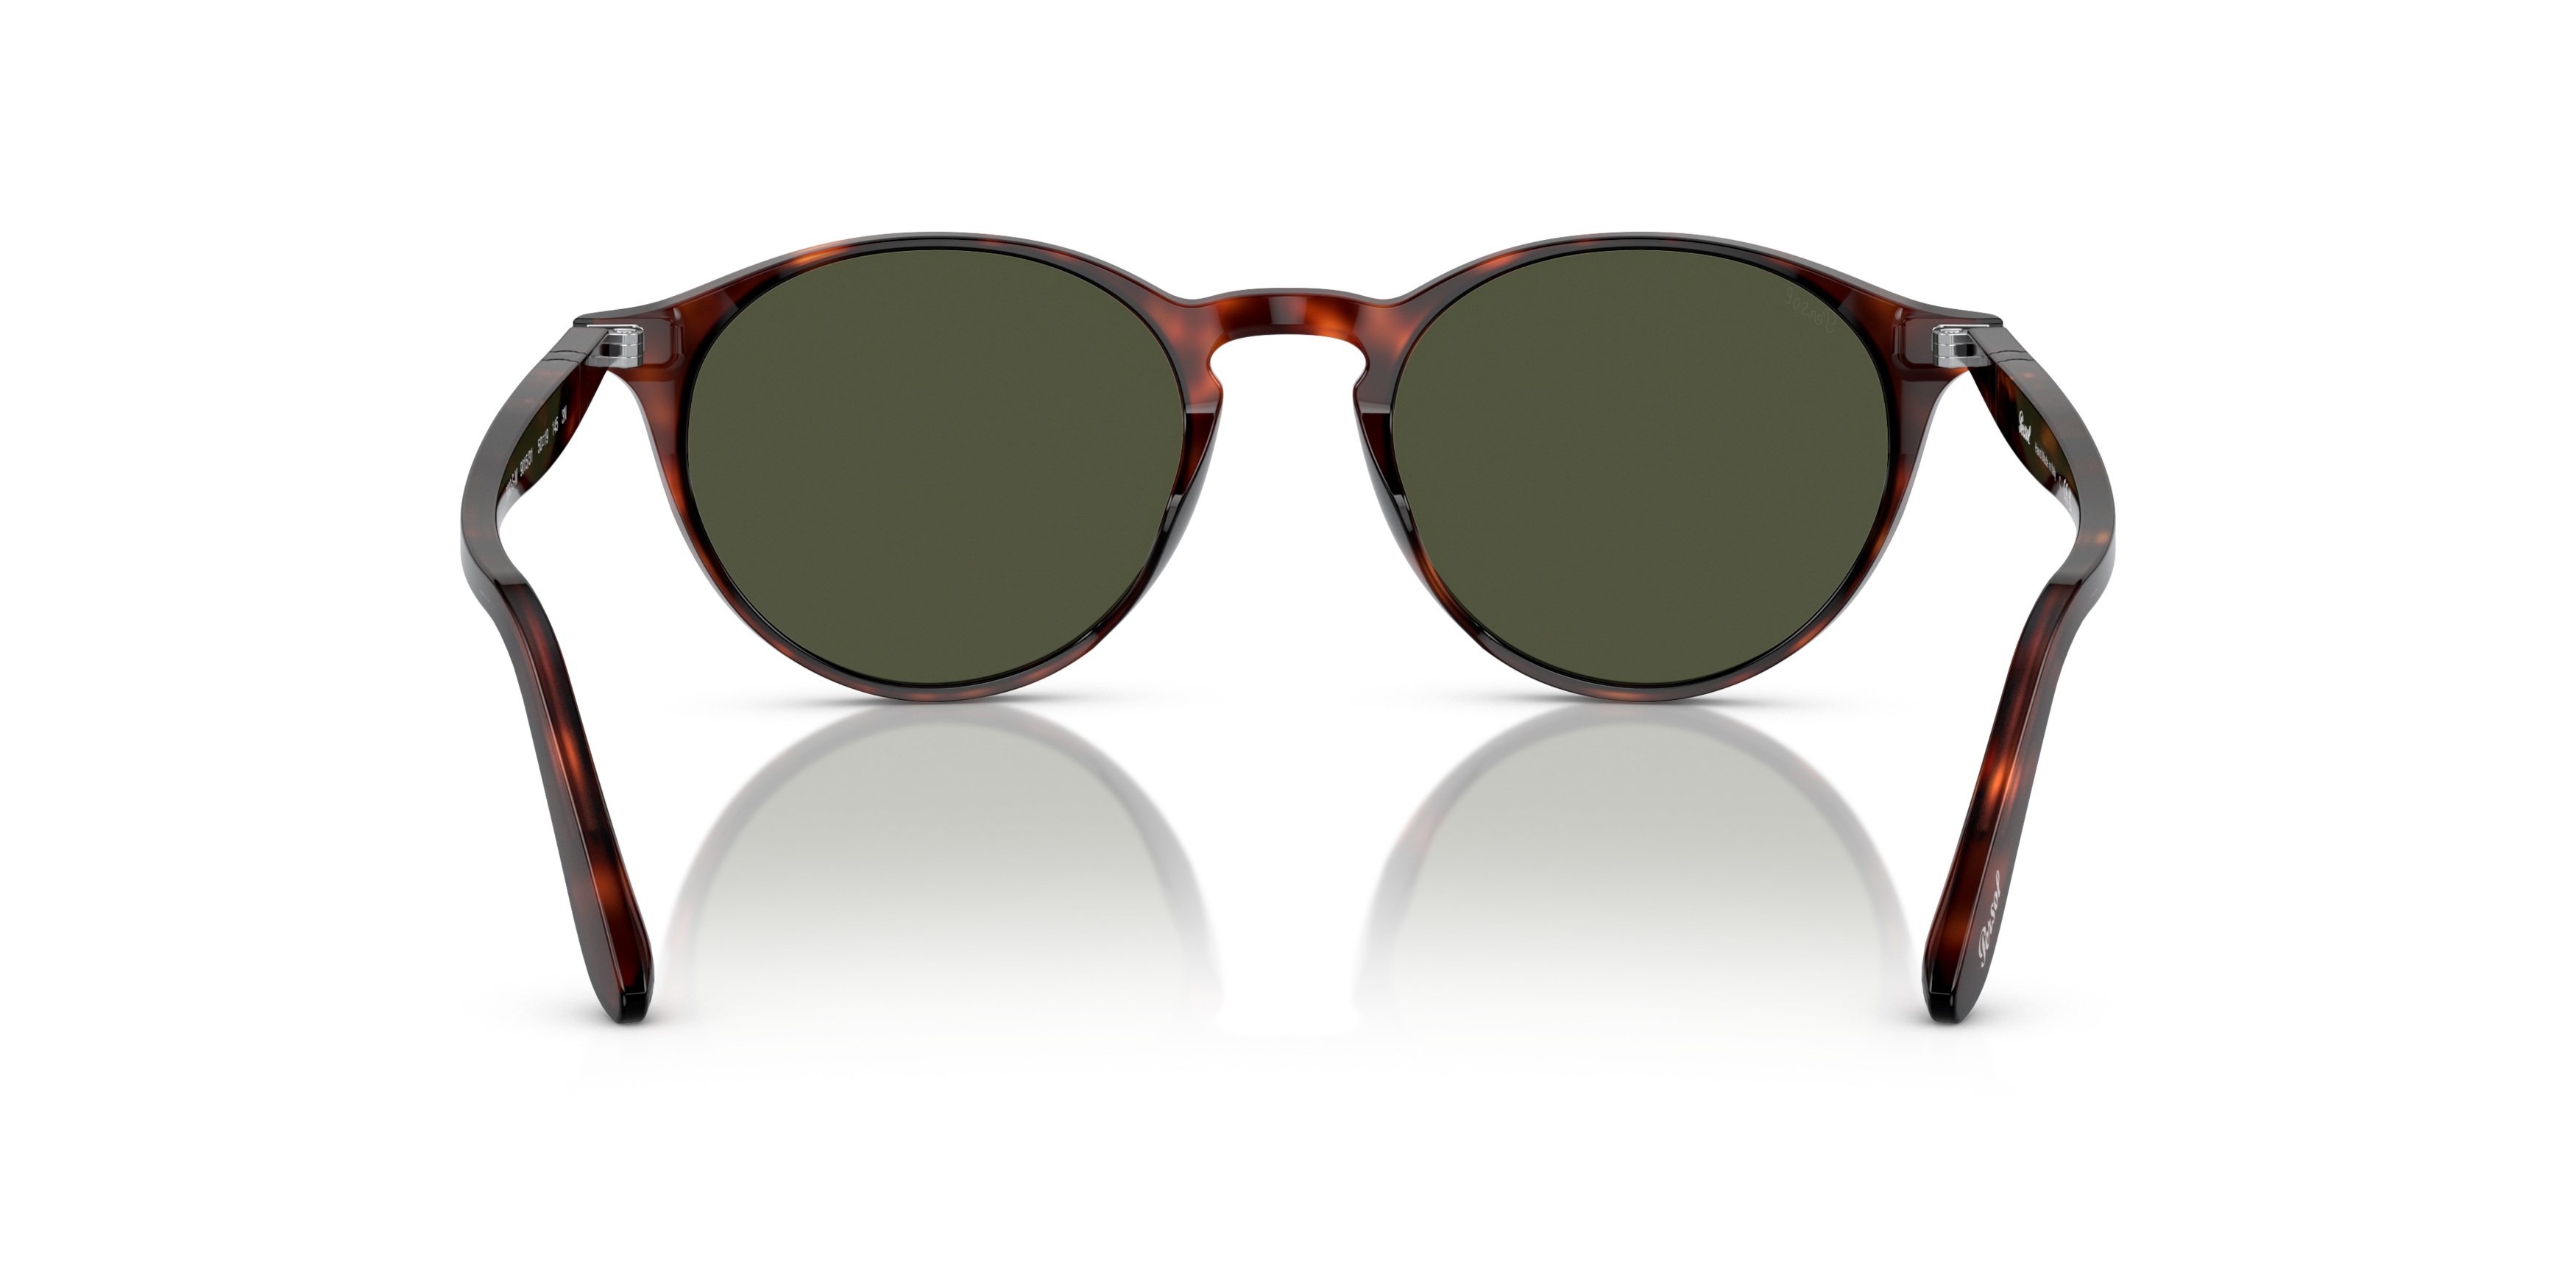 [products.image.detail02] Persol PO3092SM 901531